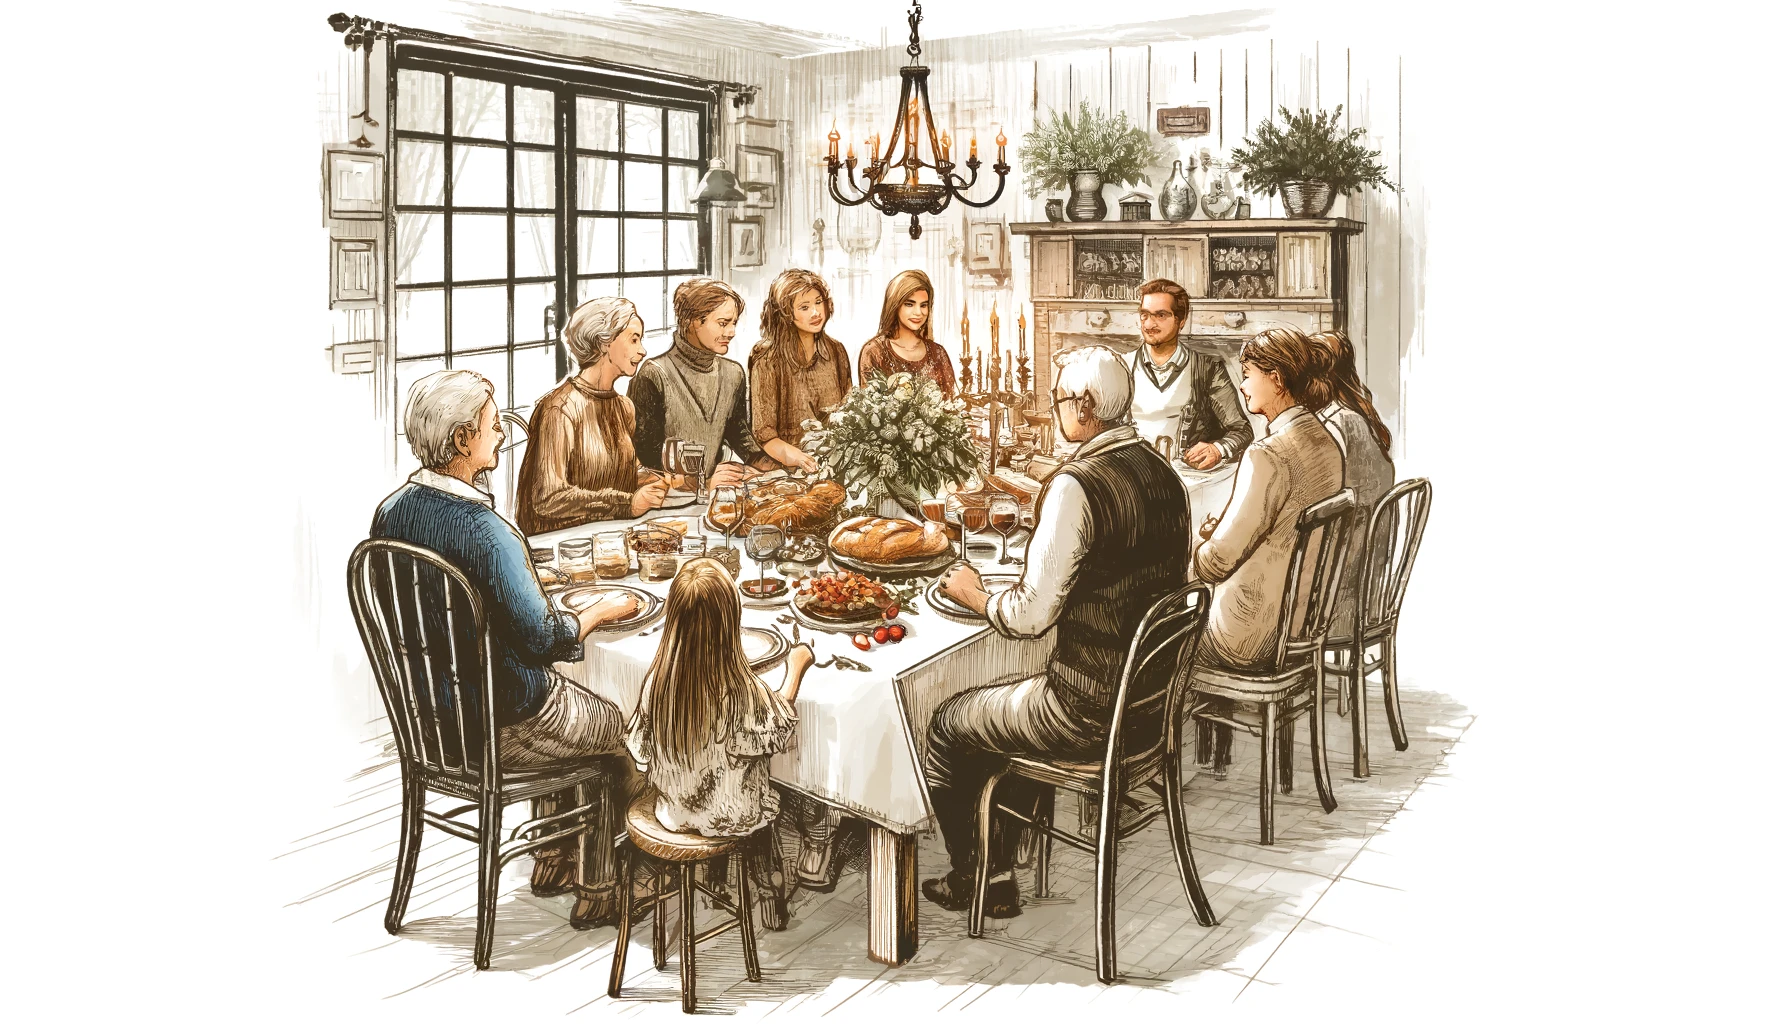 Sophisticated sketch of a traditional French family dinner, depicting multiple generations gathered around a rustic table, enjoying a meal in a warmly inviting setting, highlighting French dining culture.